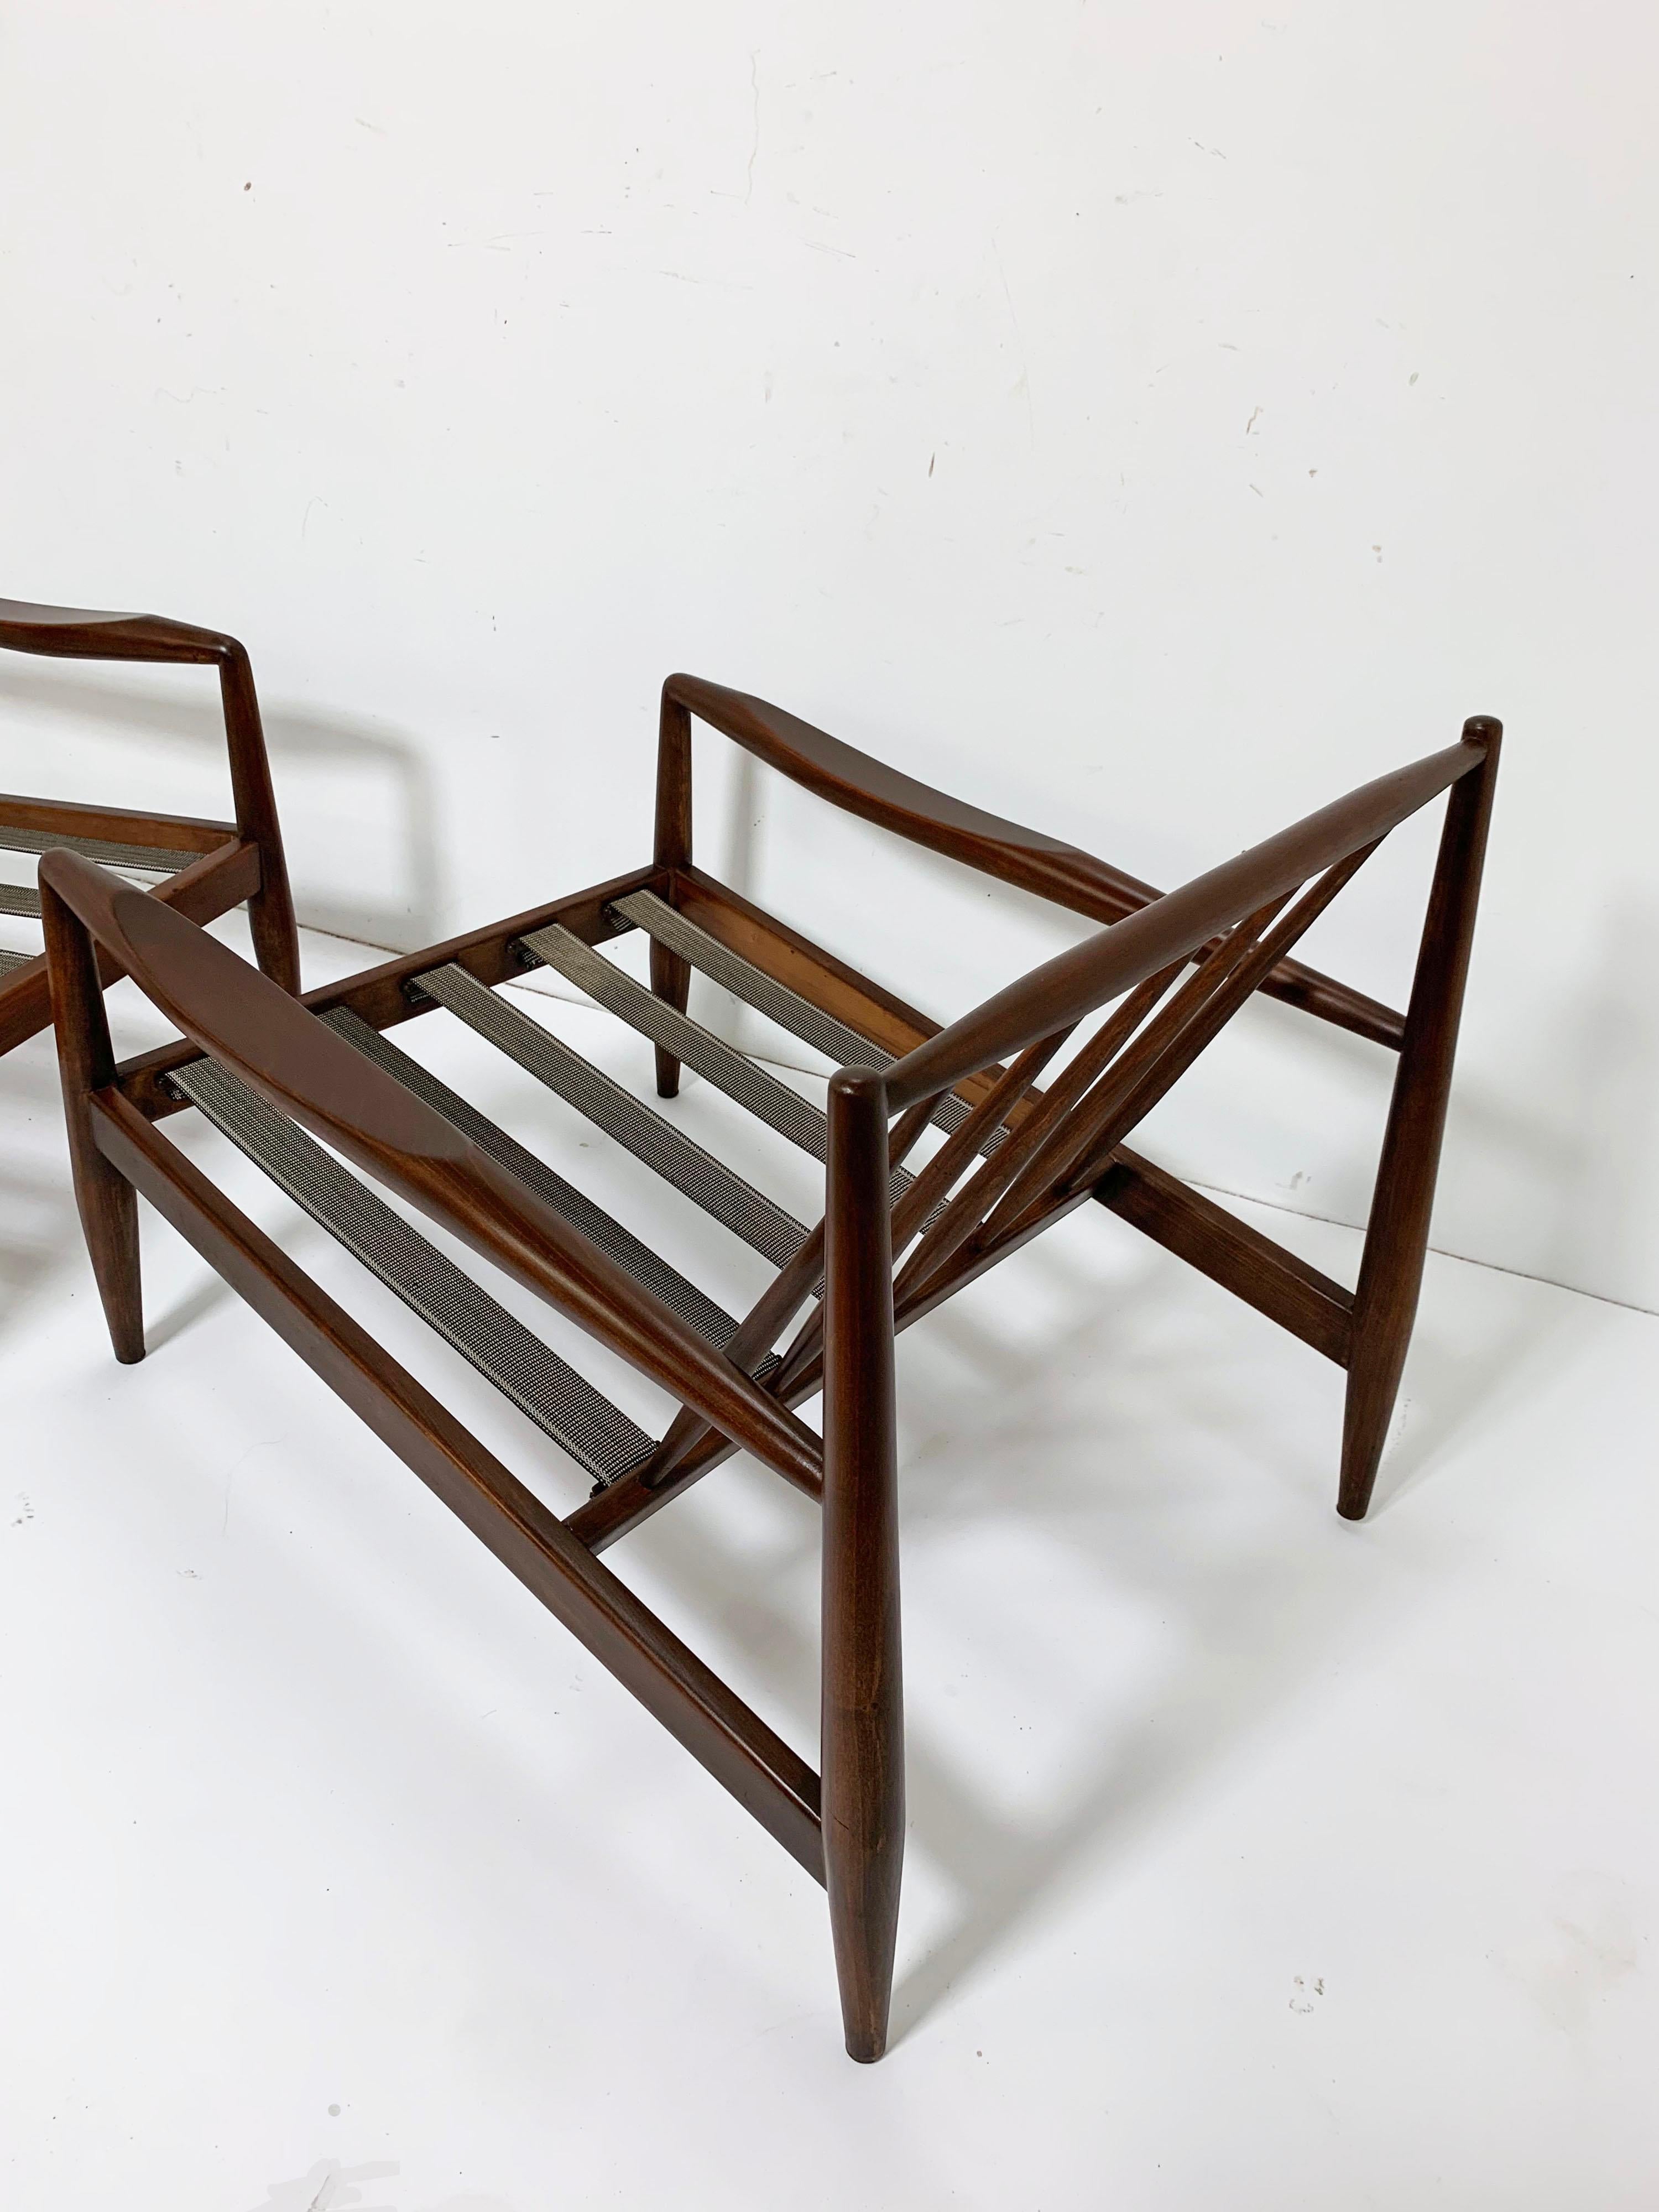 Mid-20th Century Pair of Adrian Pearsall for Craft Associates Model 834-C Lounge Chairs